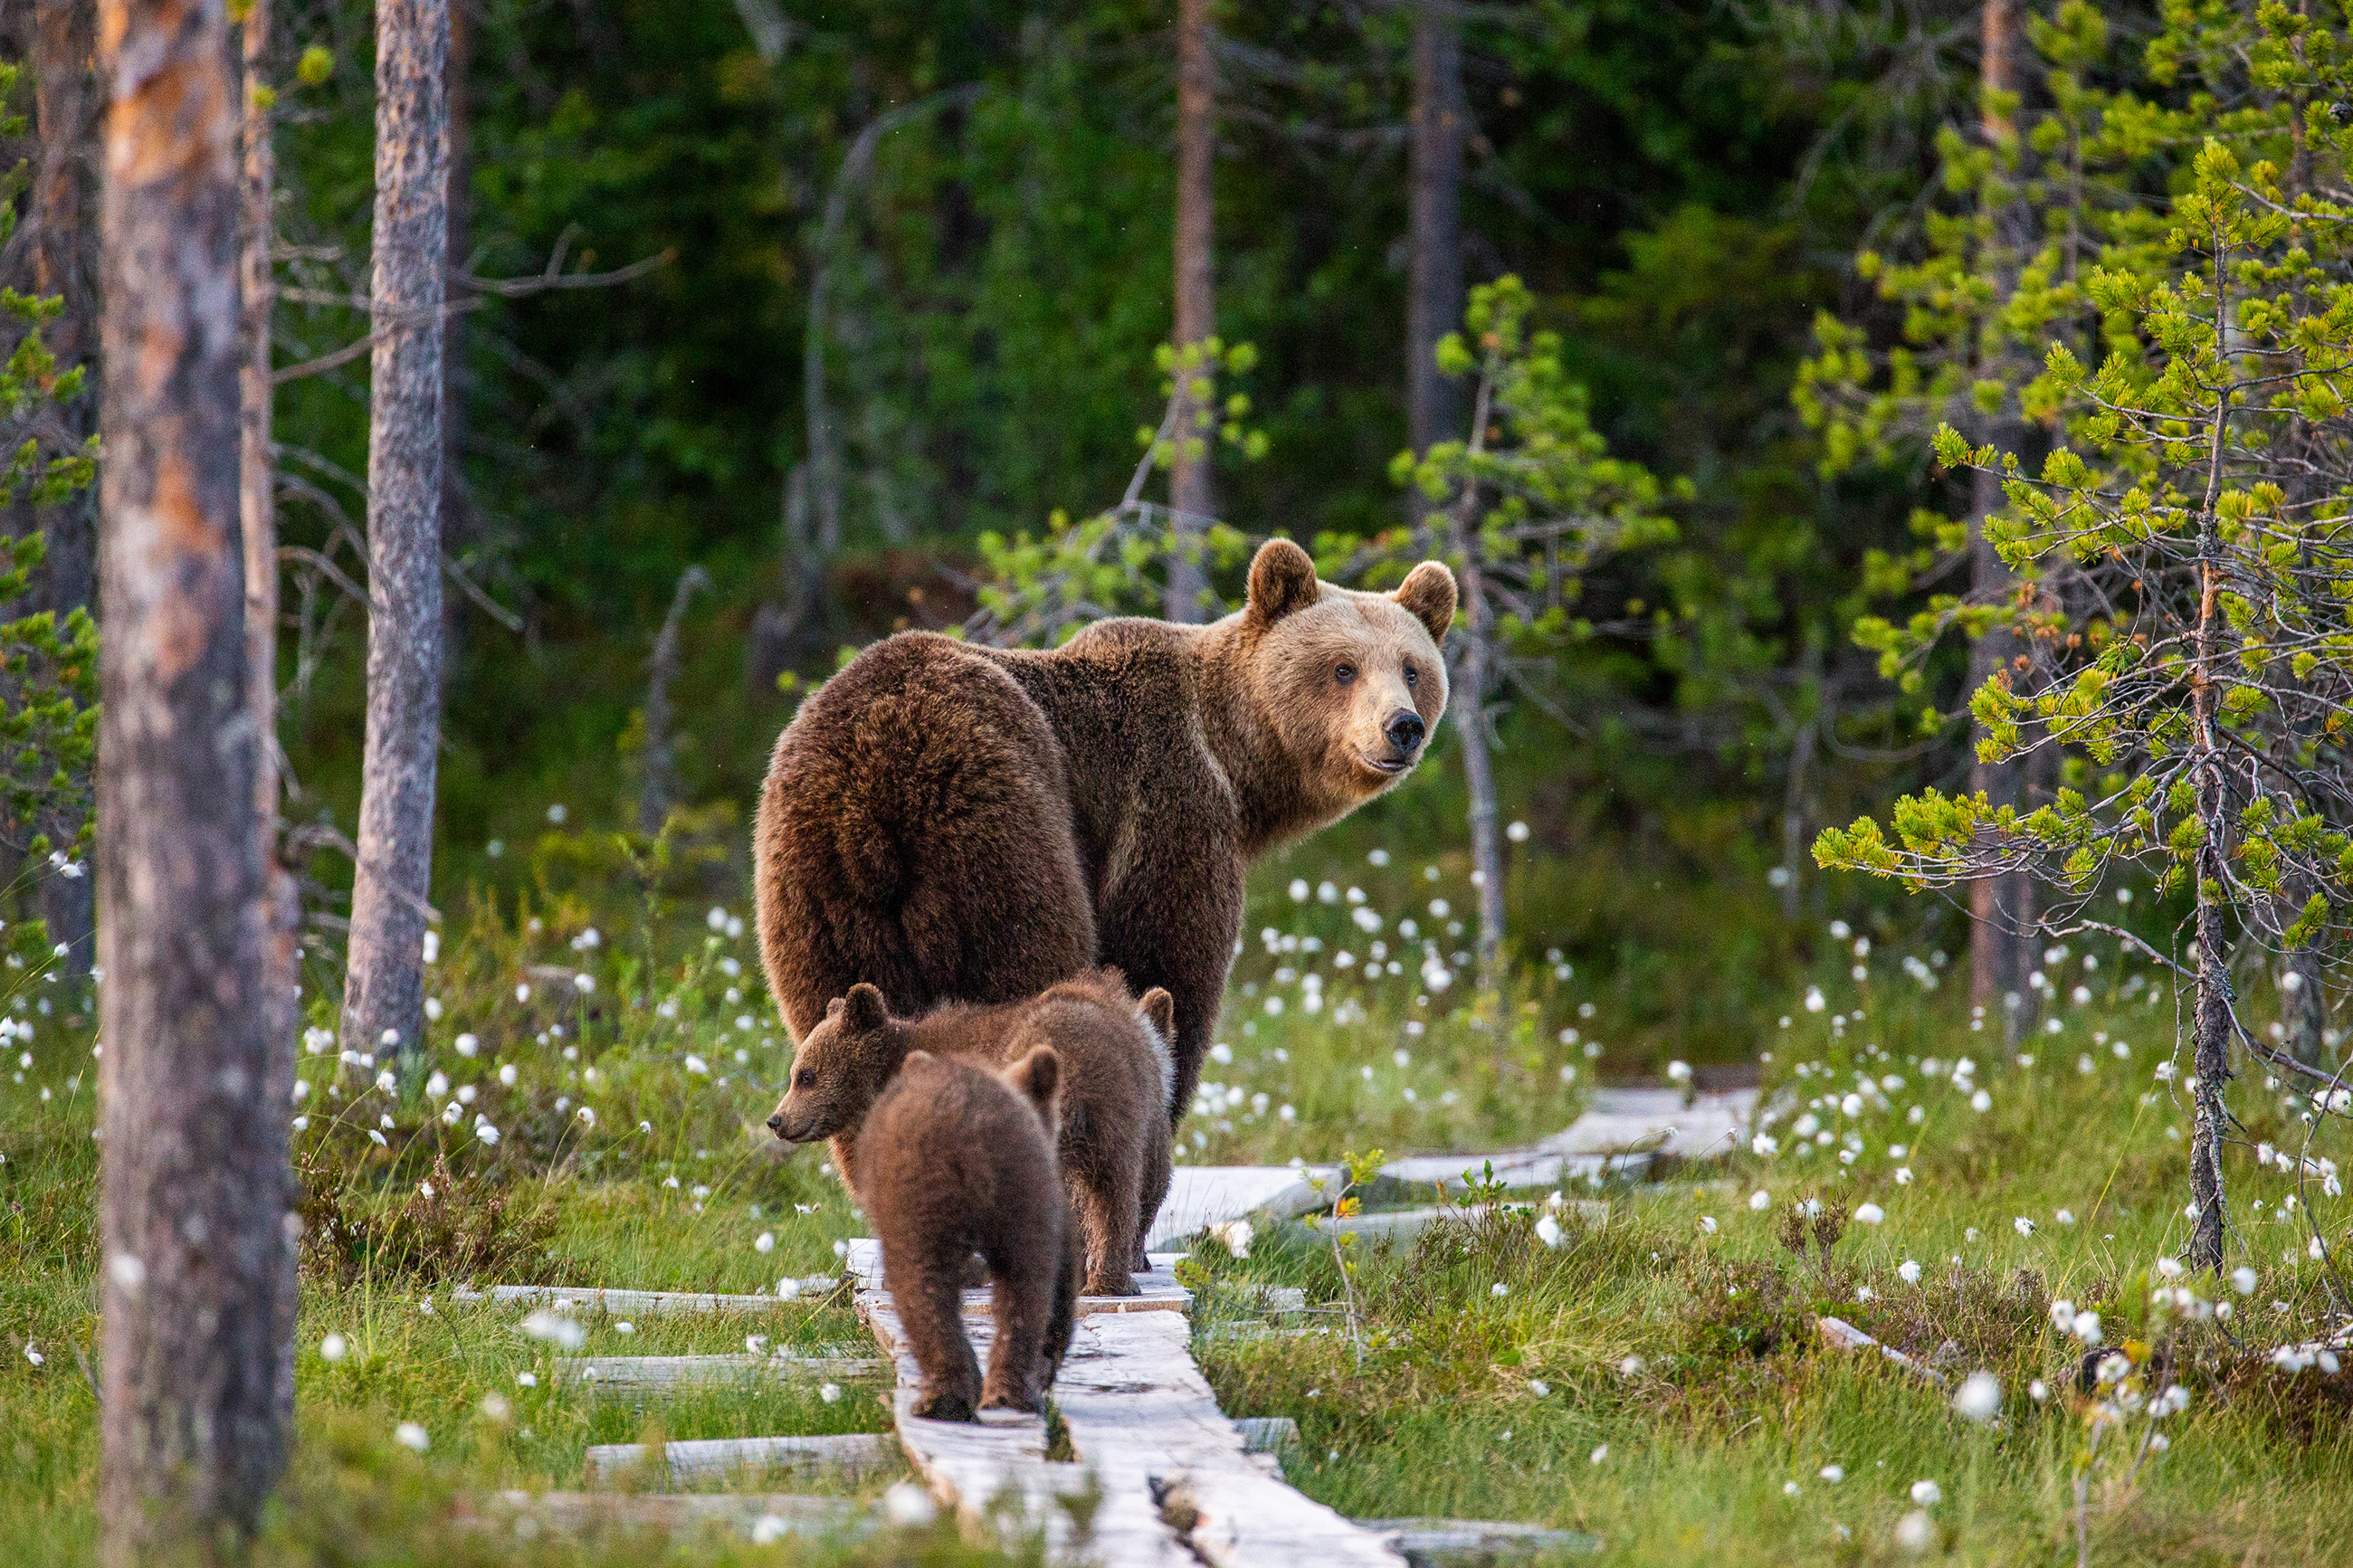 With the most shore excursions featuring a wildlife and wilderness encounter, Holland America Line offers nearly 180 tours to see species of all kinds, including bears.